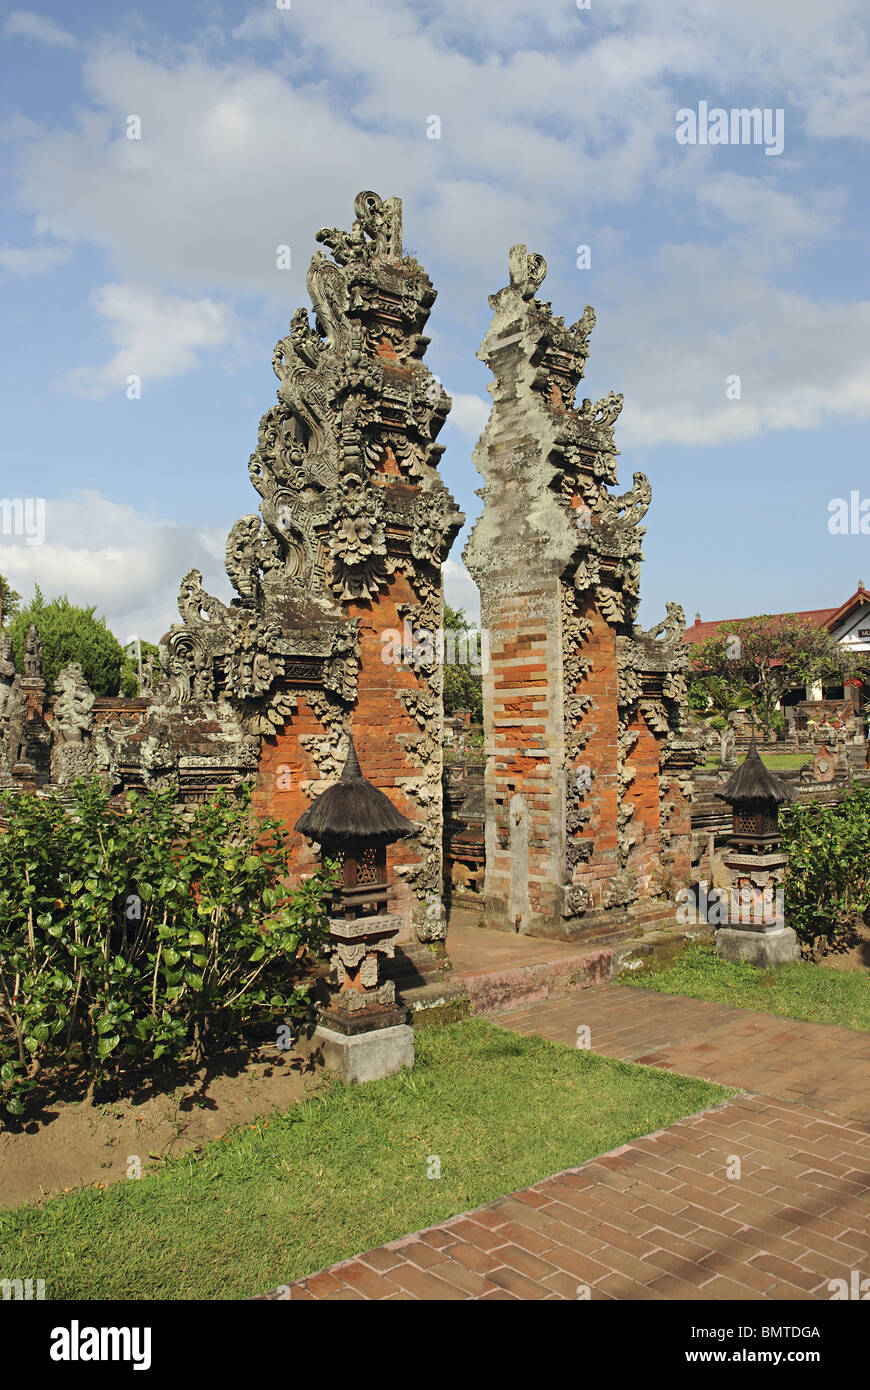 Indonesia-Bali, One of the entrances to Bali Museum. Stock Photo